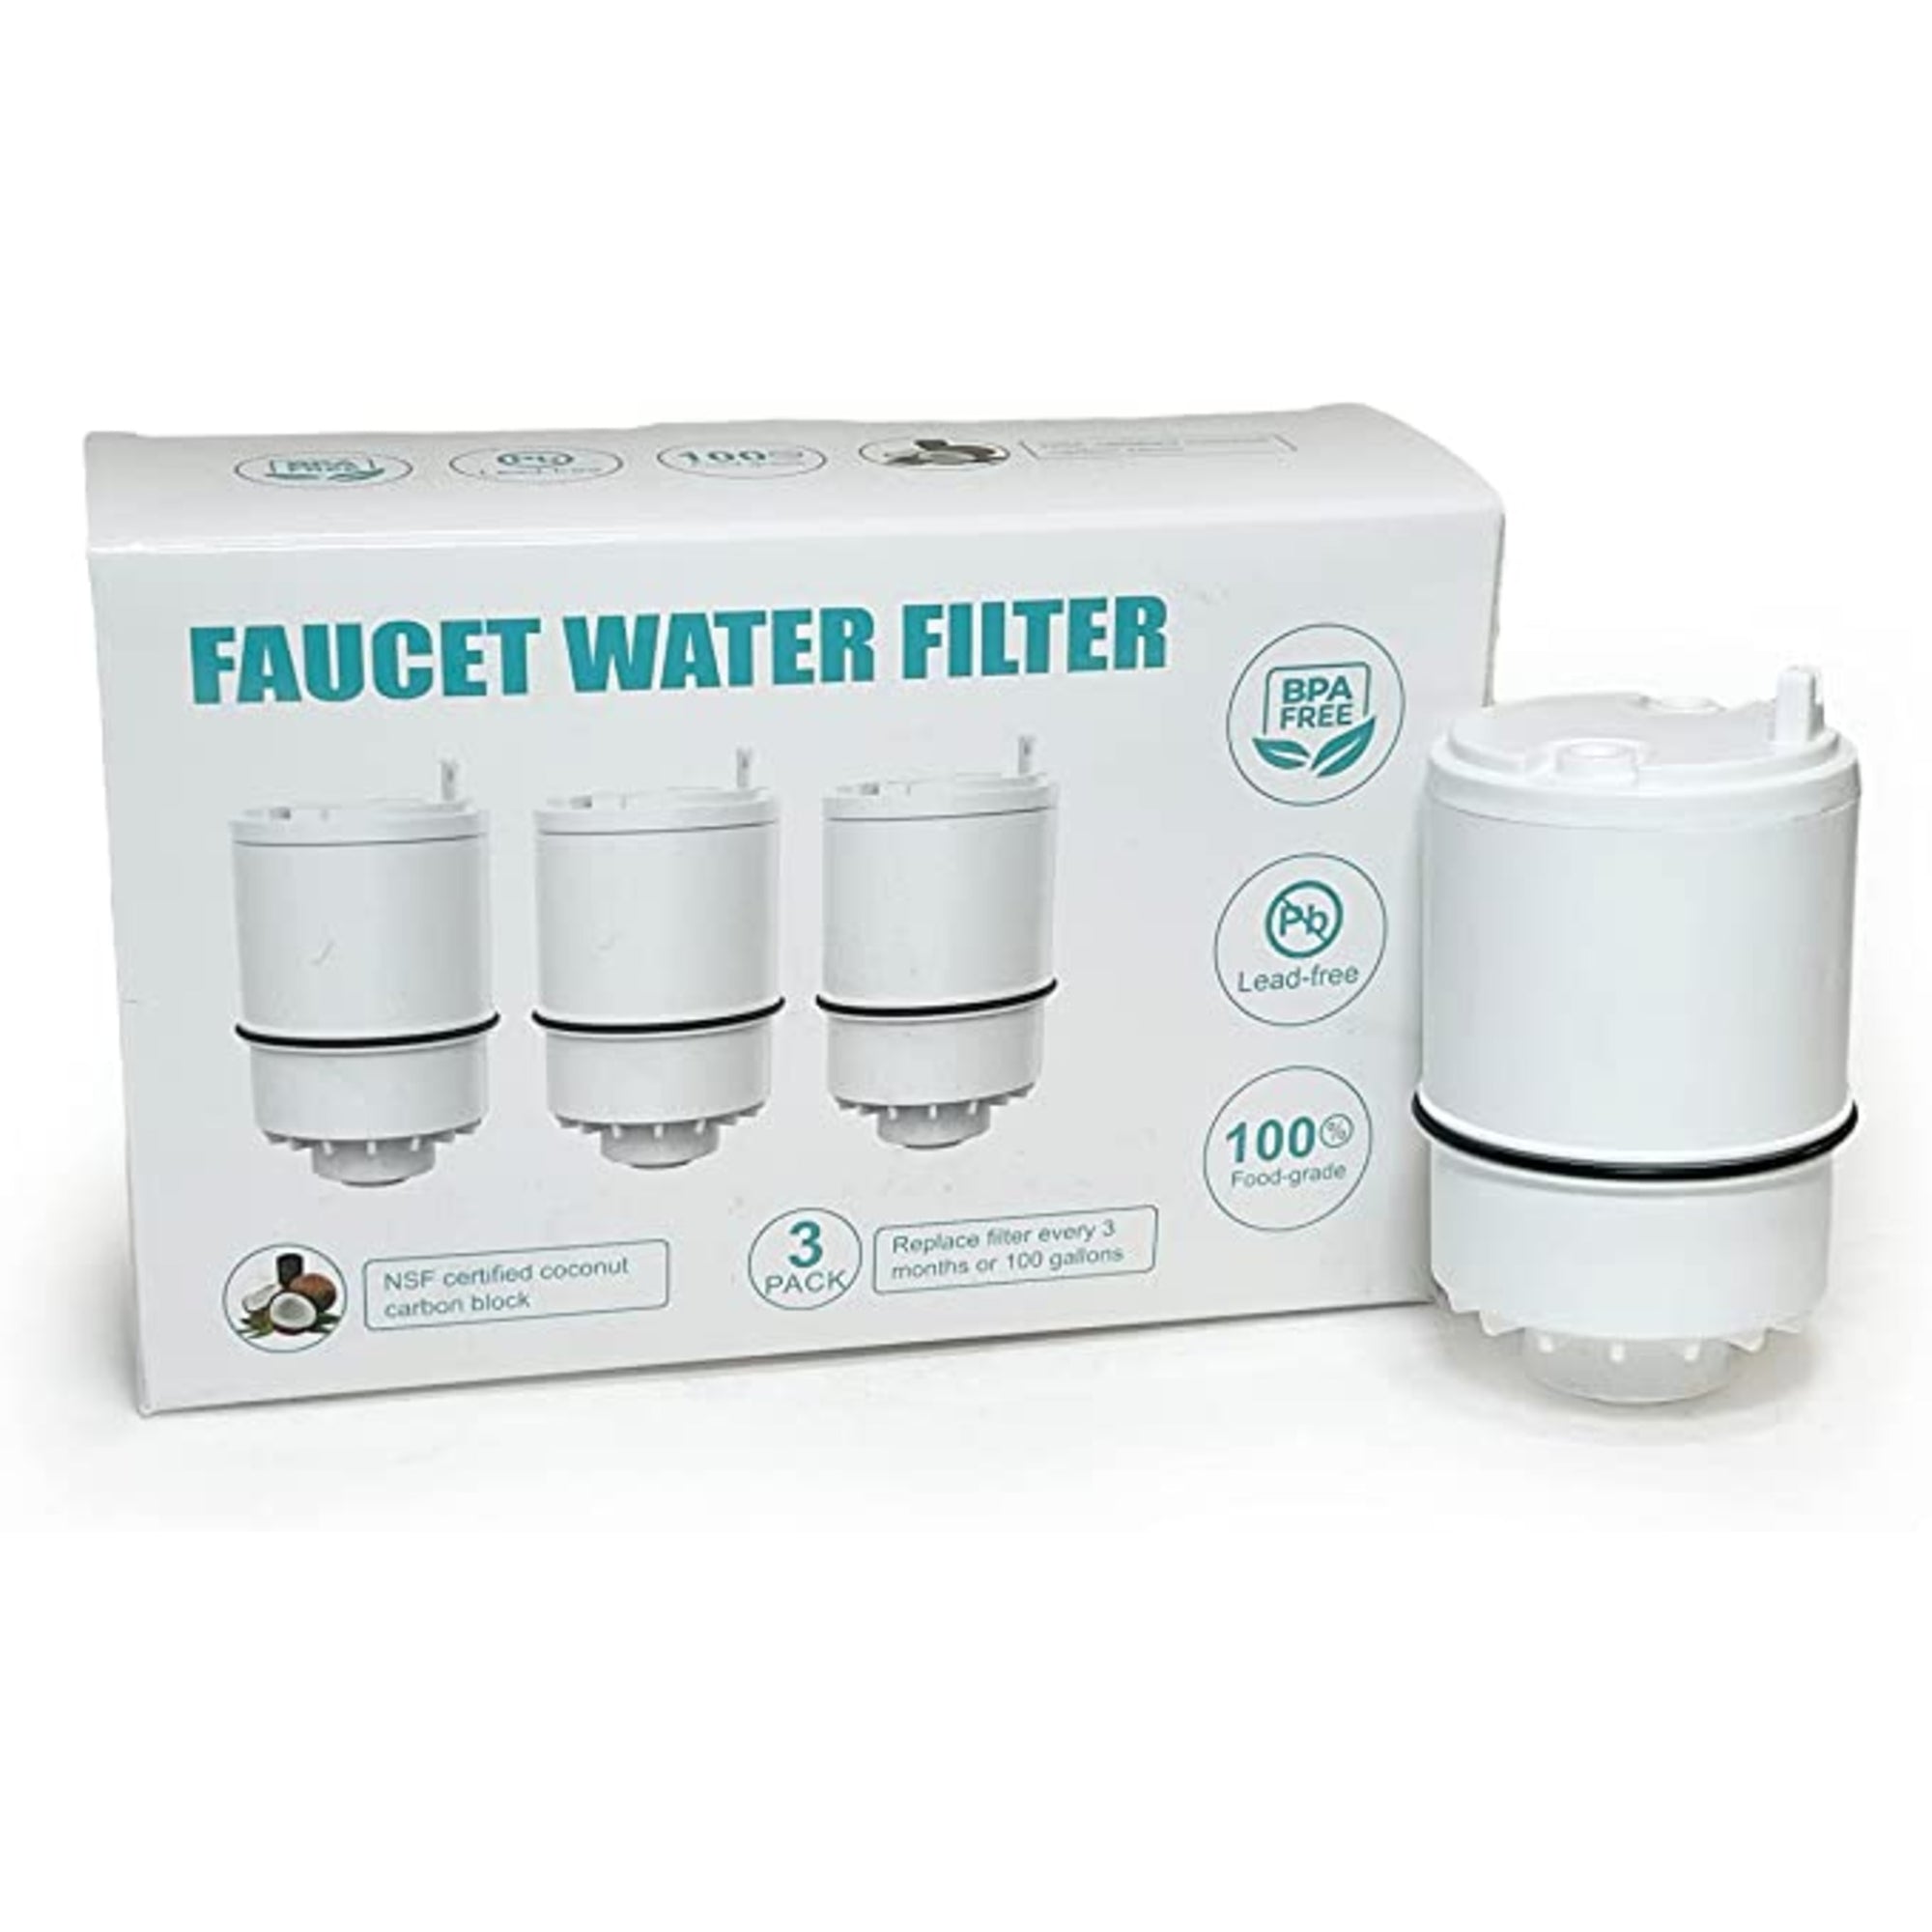 Nispira Water Filter for RF3375 and PUR  Filtration Systems, Removes Chlorine, Lead, Odor, Color. 3 Months Filtration